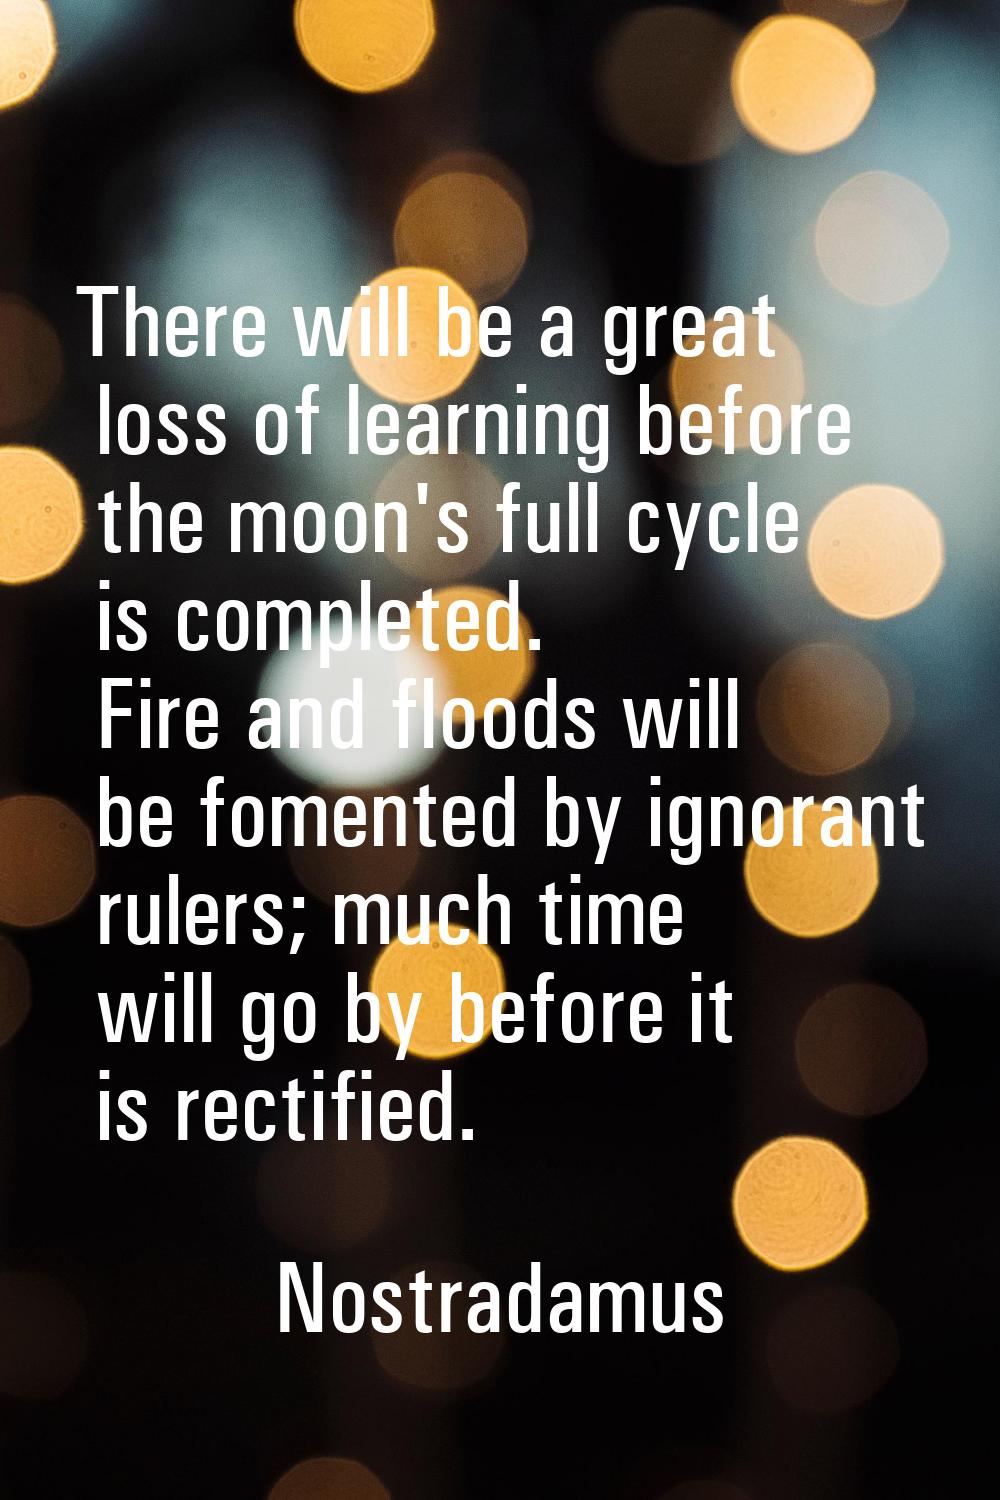 There will be a great loss of learning before the moon's full cycle is completed. Fire and floods w